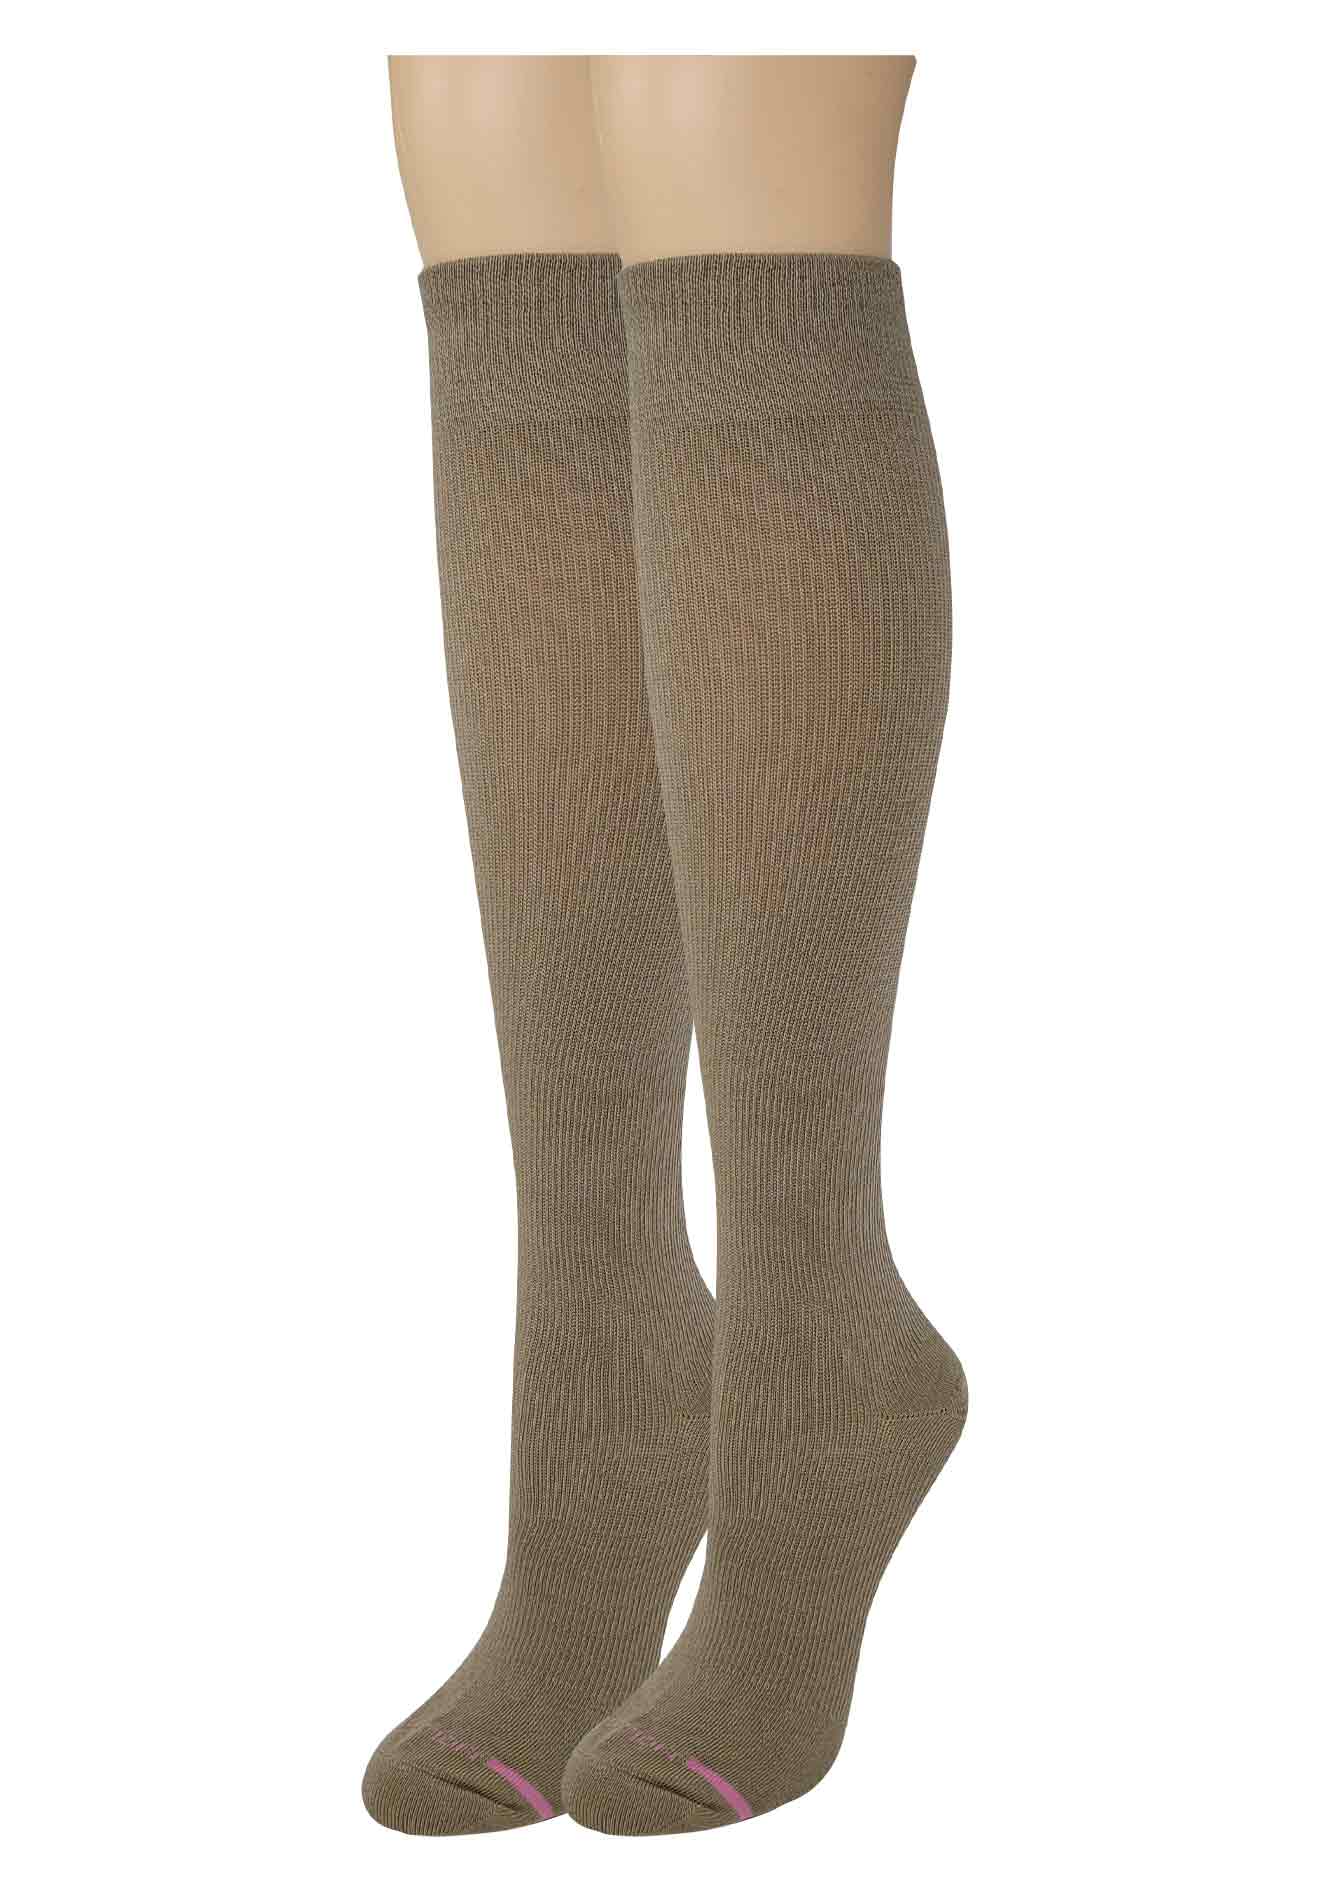 Knee High Compression Socks | Assorted Solid Colors | Womens (4 Pairs)